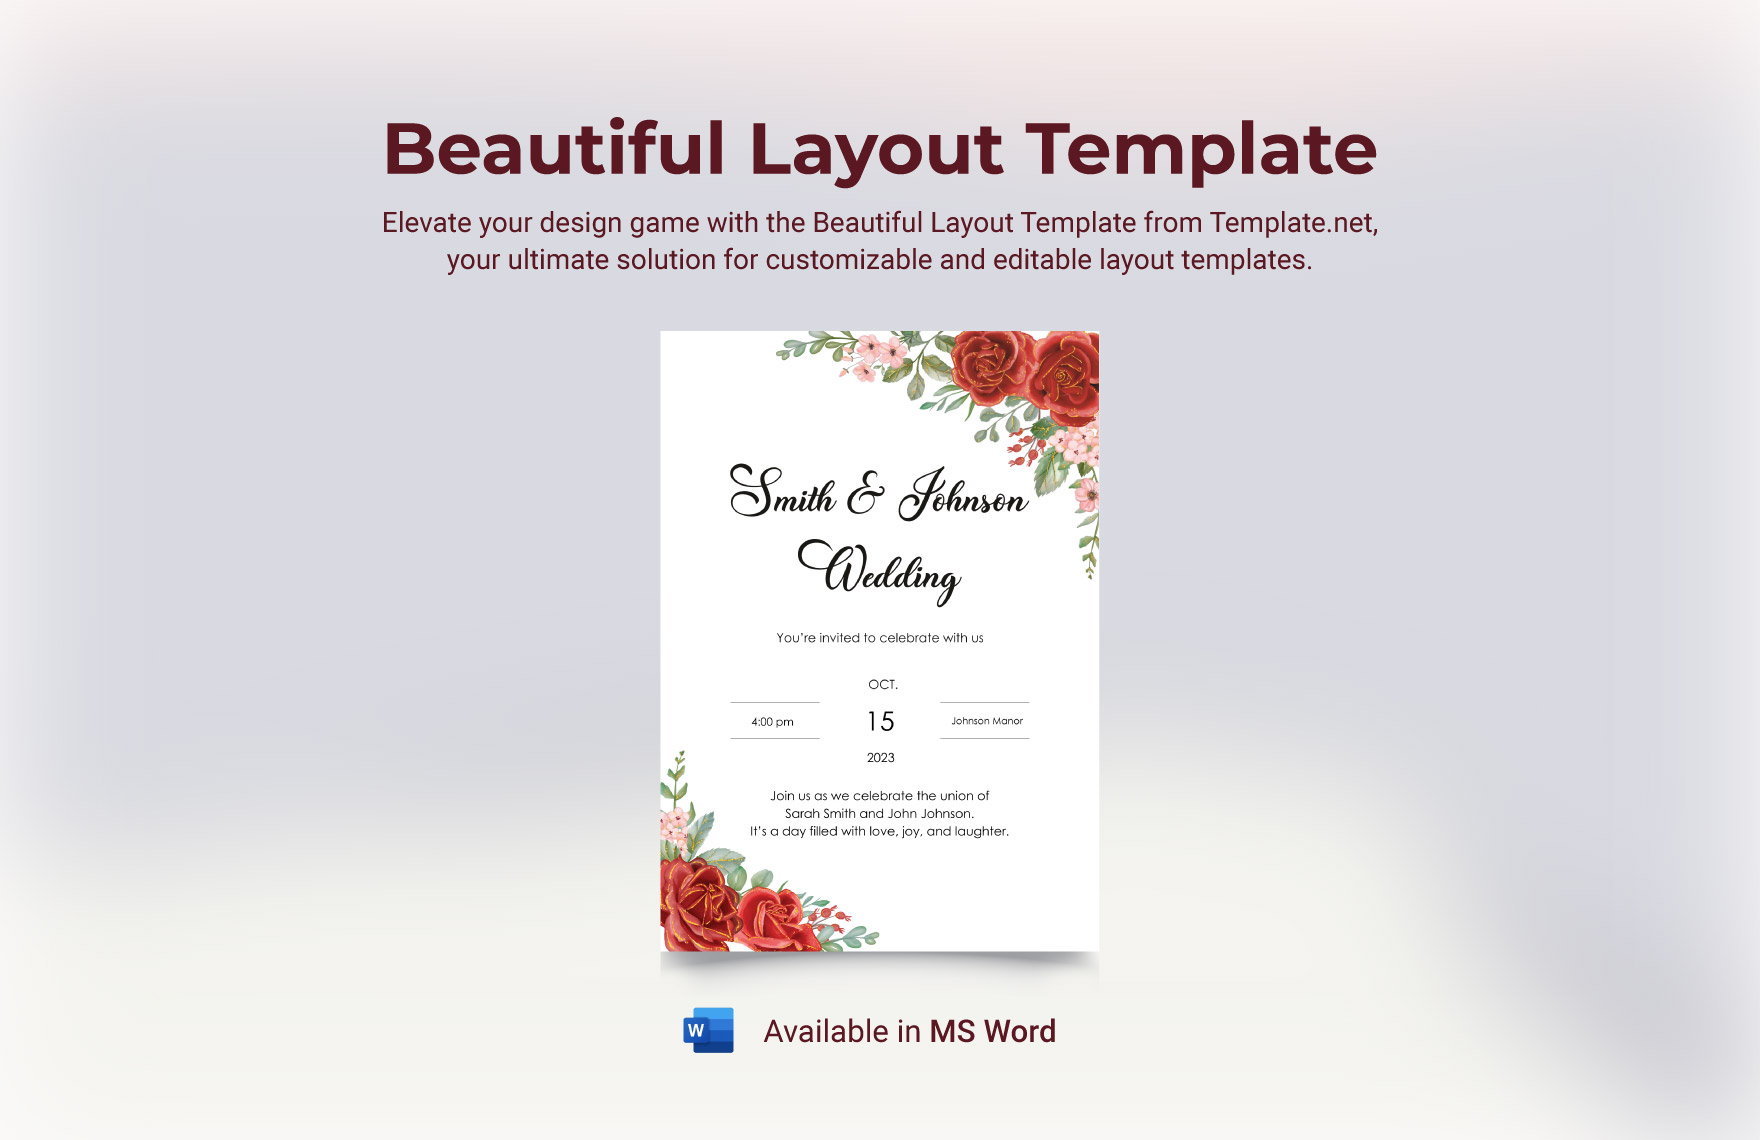 Free Beautiful Layout Template in Word